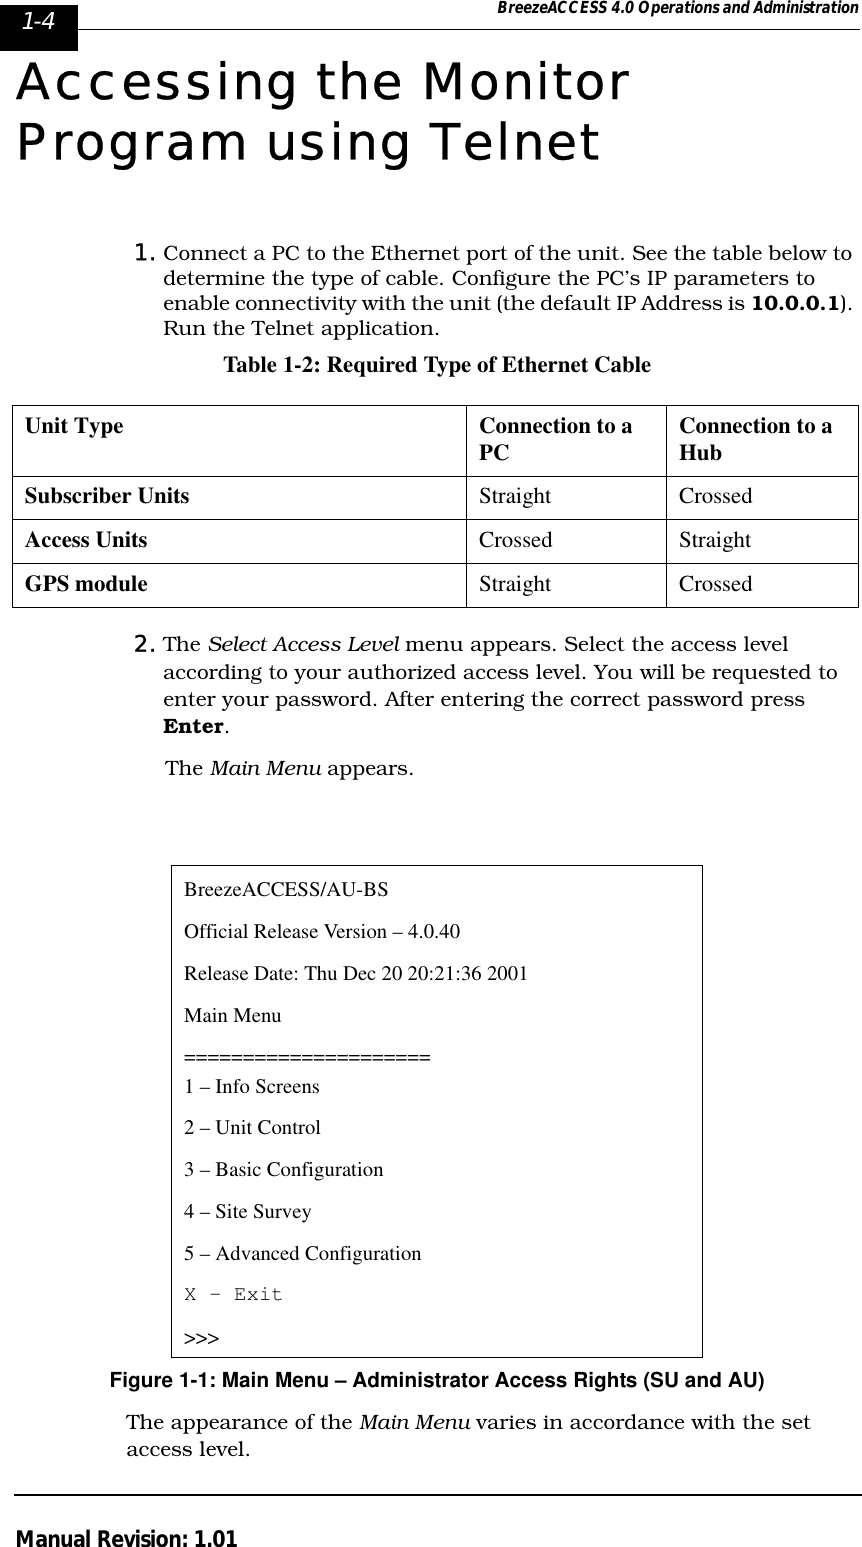 1-4 BreezeACCESS 4.0 Operations and AdministrationManual Revision: 1.01Accessing the Monitor Program using Telnet1. Connect a PC to the Ethernet port of the unit. See the table below to determine the type of cable. Configure the PC’s IP parameters to enable connectivity with the unit (the default IP Address is 10.0.0.1). Run the Telnet application.Table 1-2: Required Type of Ethernet Cable2. The Select Access Level menu appears. Select the access level according to your authorized access level. You will be requested to enter your password. After entering the correct password press Enter. The Main Menu appears.Figure 1-1: Main Menu – Administrator Access Rights (SU and AU)The appearance of the Main Menu varies in accordance with the set access level.Unit Type Connection to a PC Connection to a HubSubscriber Units  Straight CrossedAccess Units Crossed StraightGPS module Straight CrossedBreezeACCESS/AU-BSOfficial Release Version – 4.0.40Release Date: Thu Dec 20 20:21:36 2001Main Menu=====================1 – Info Screens2 – Unit Control3 – Basic Configuration4 – Site Survey5 – Advanced ConfigurationX - Exit&gt;&gt;&gt;